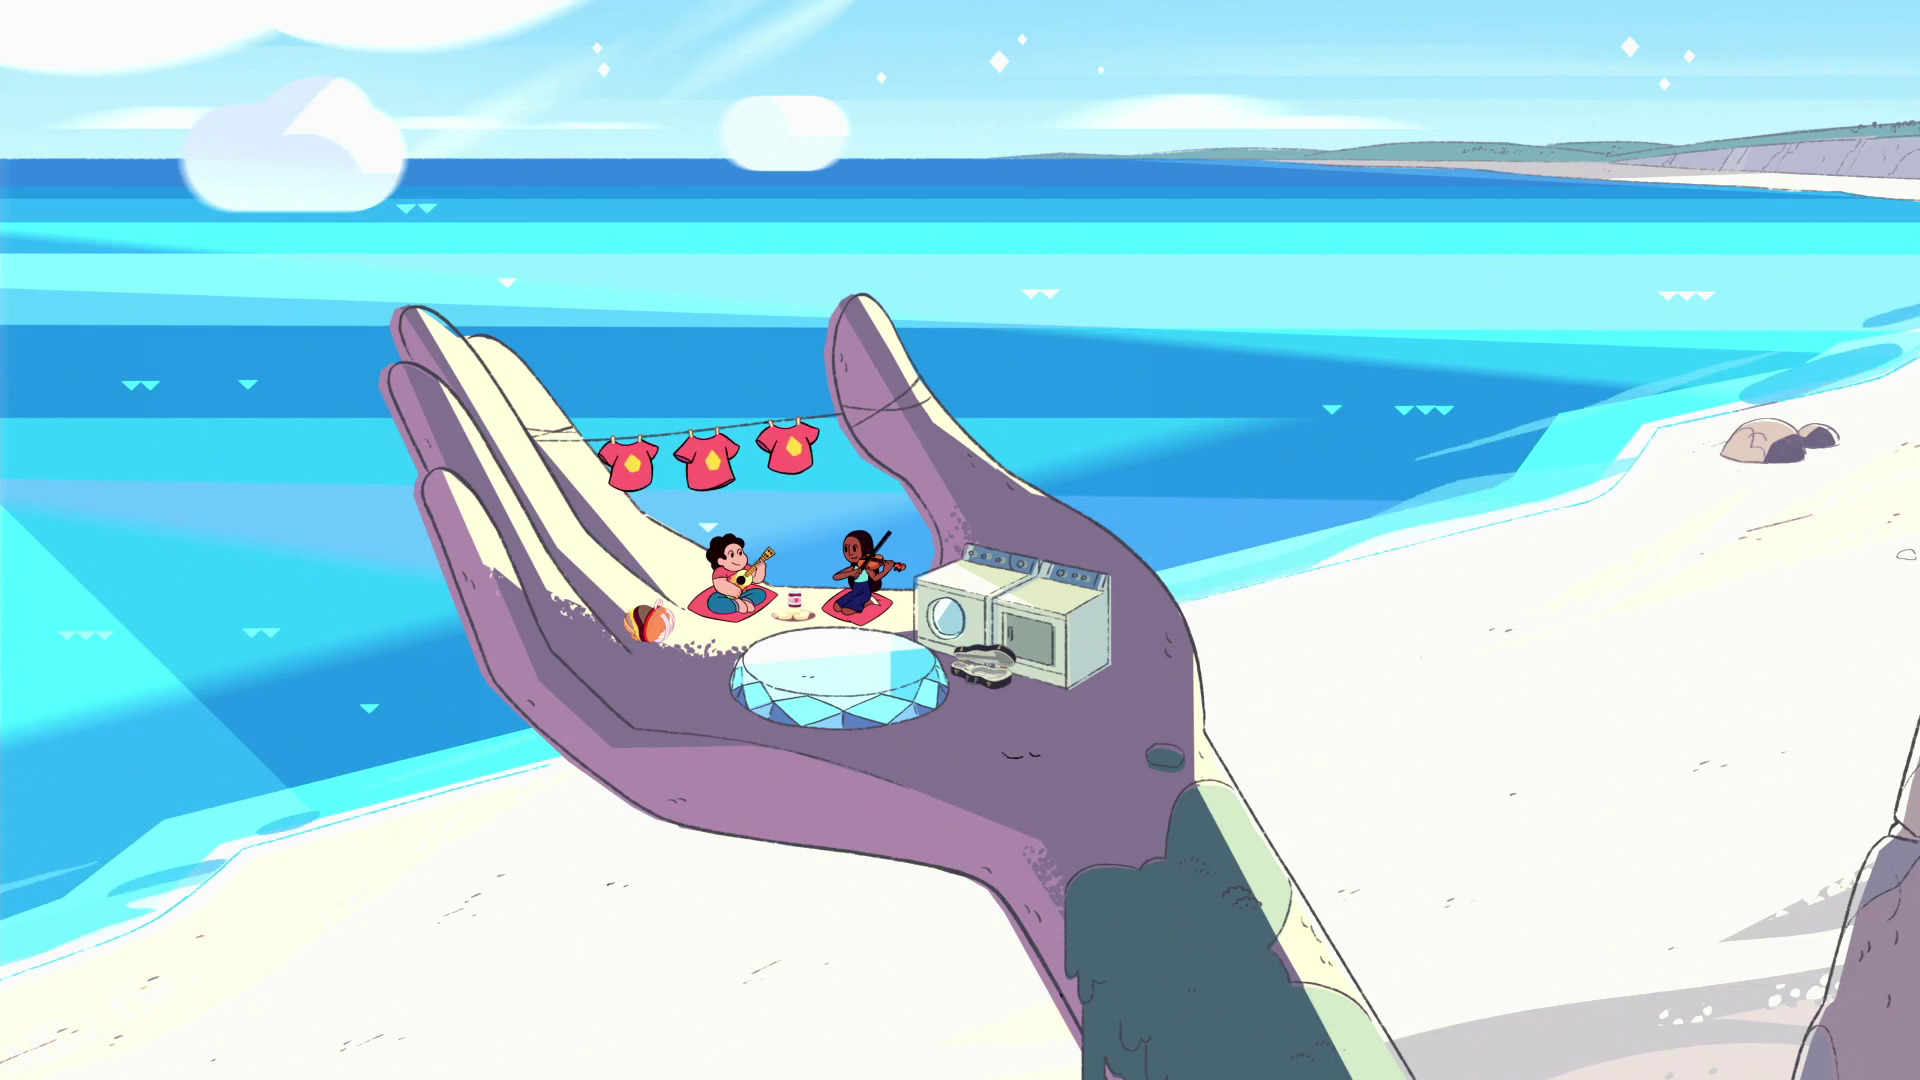 An animated scene from Steven Universe, showing a giant purple hand holding a small human family on a beach. - Steven Universe